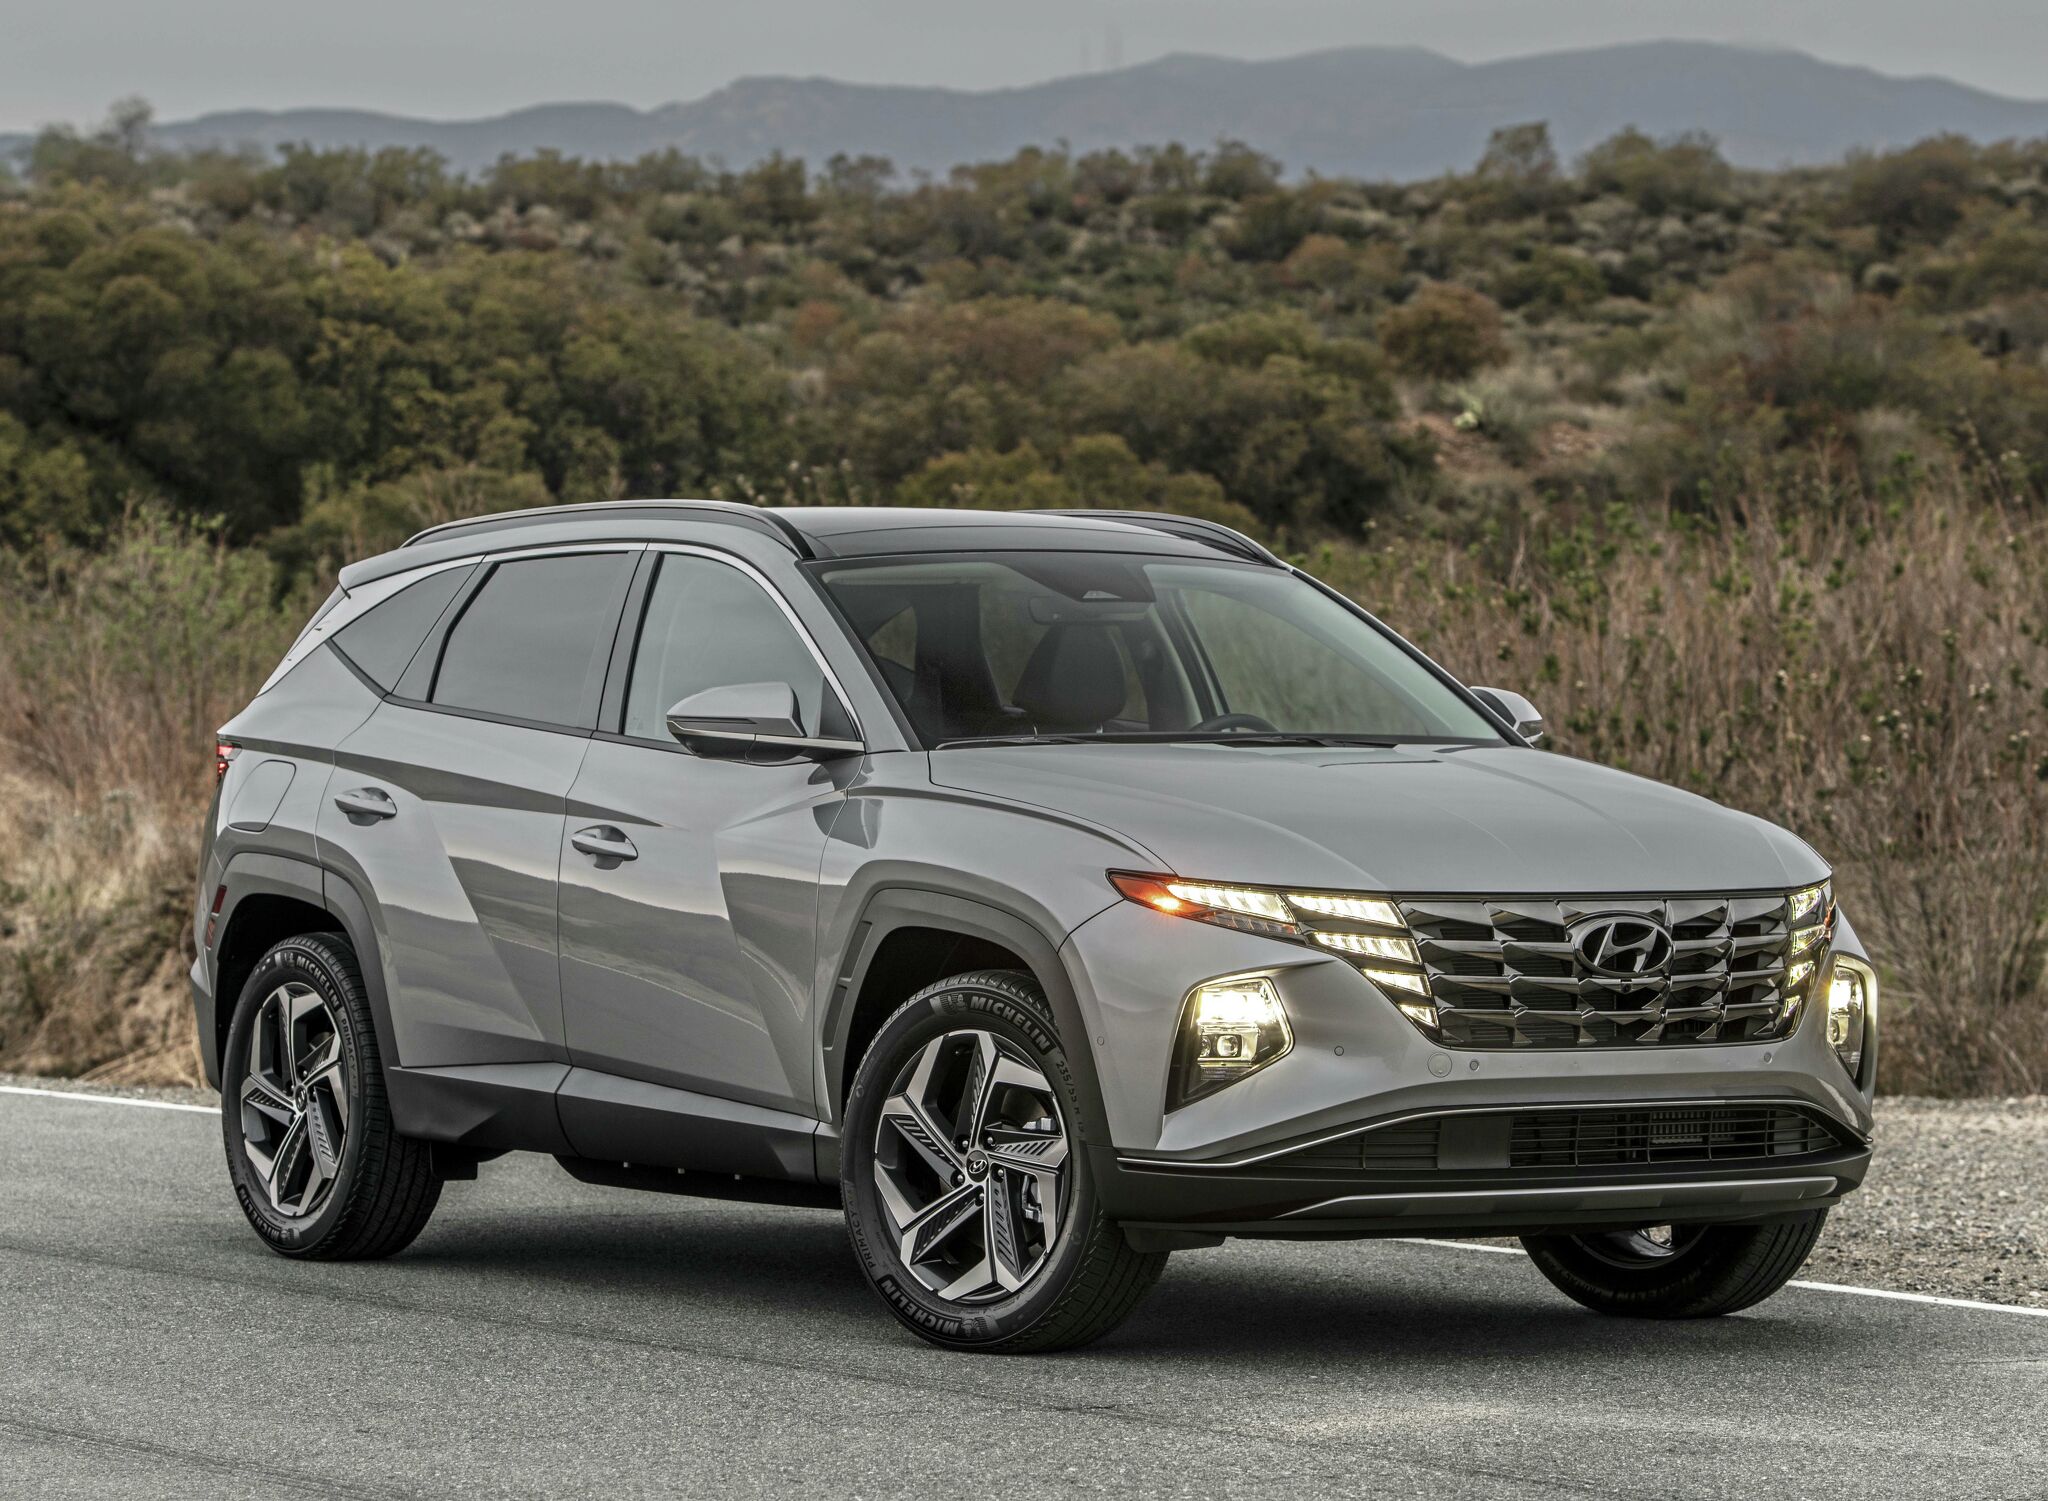 Hyundai adds plug-in hybrid models to updated Tucson crossover lineup